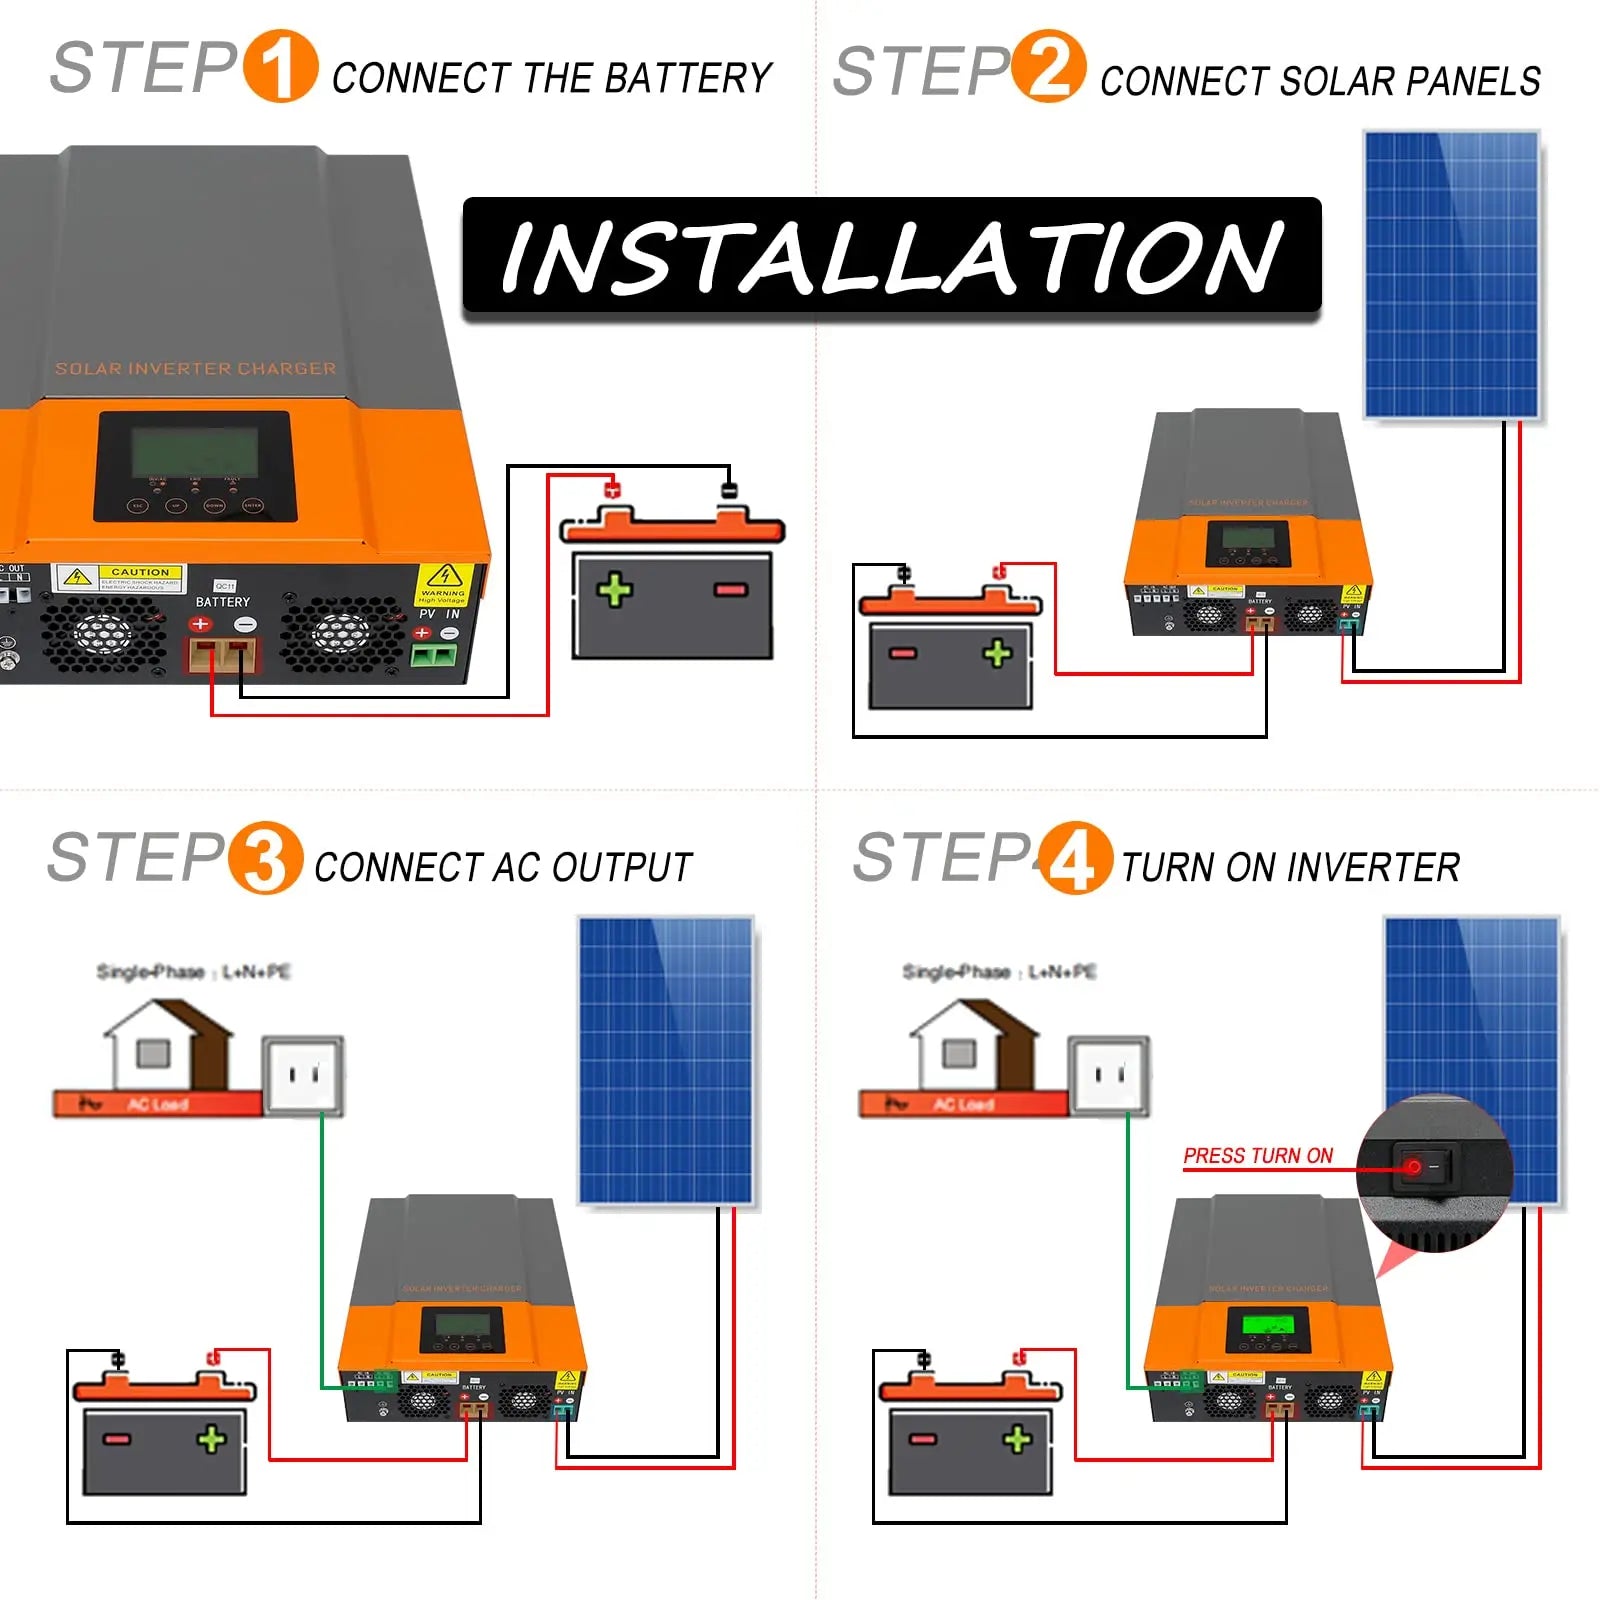 PowMr Hybrid Solar Inverter, Install solar panels and inverter charger after connecting battery; turn off DC power before inverter use.